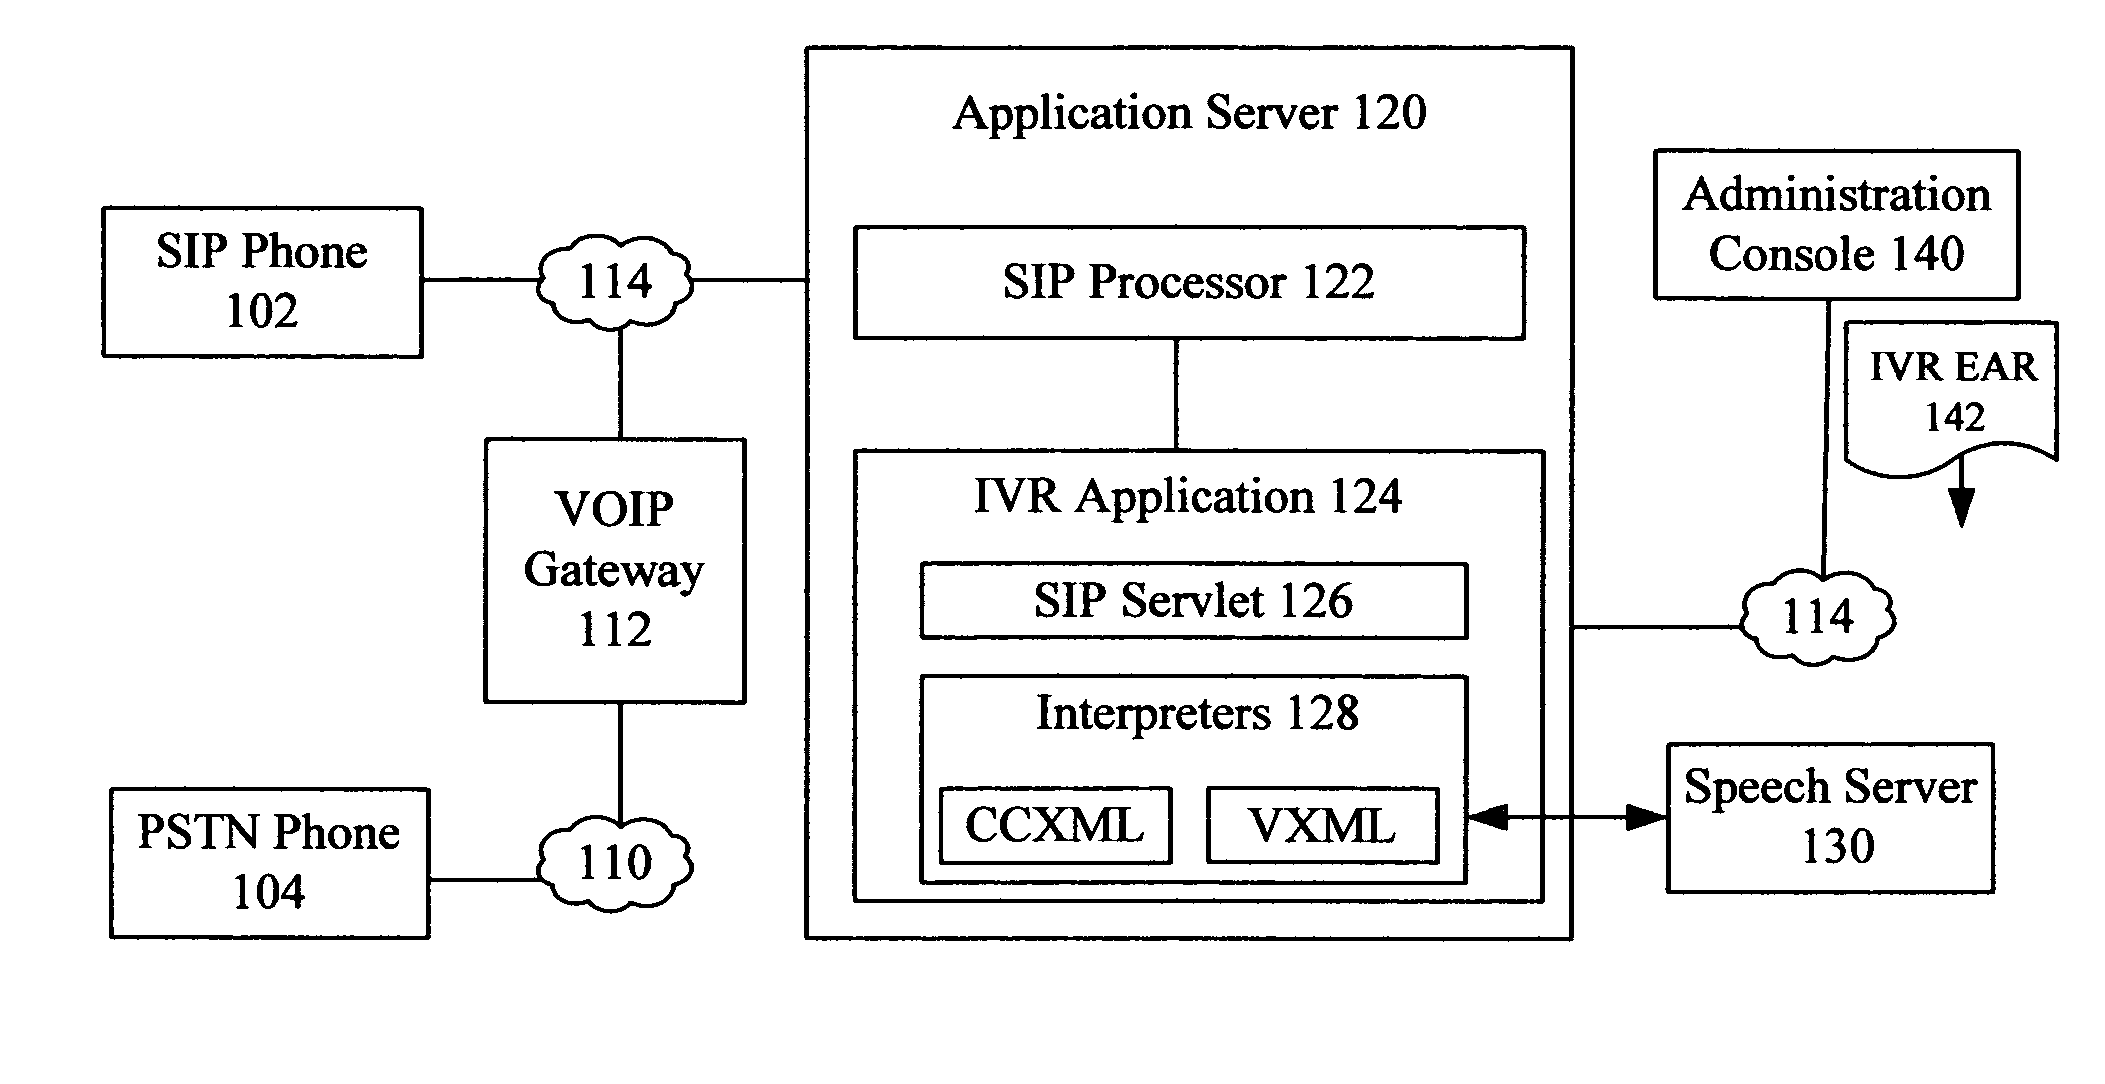 Integrating an IVR application within a standards based application server